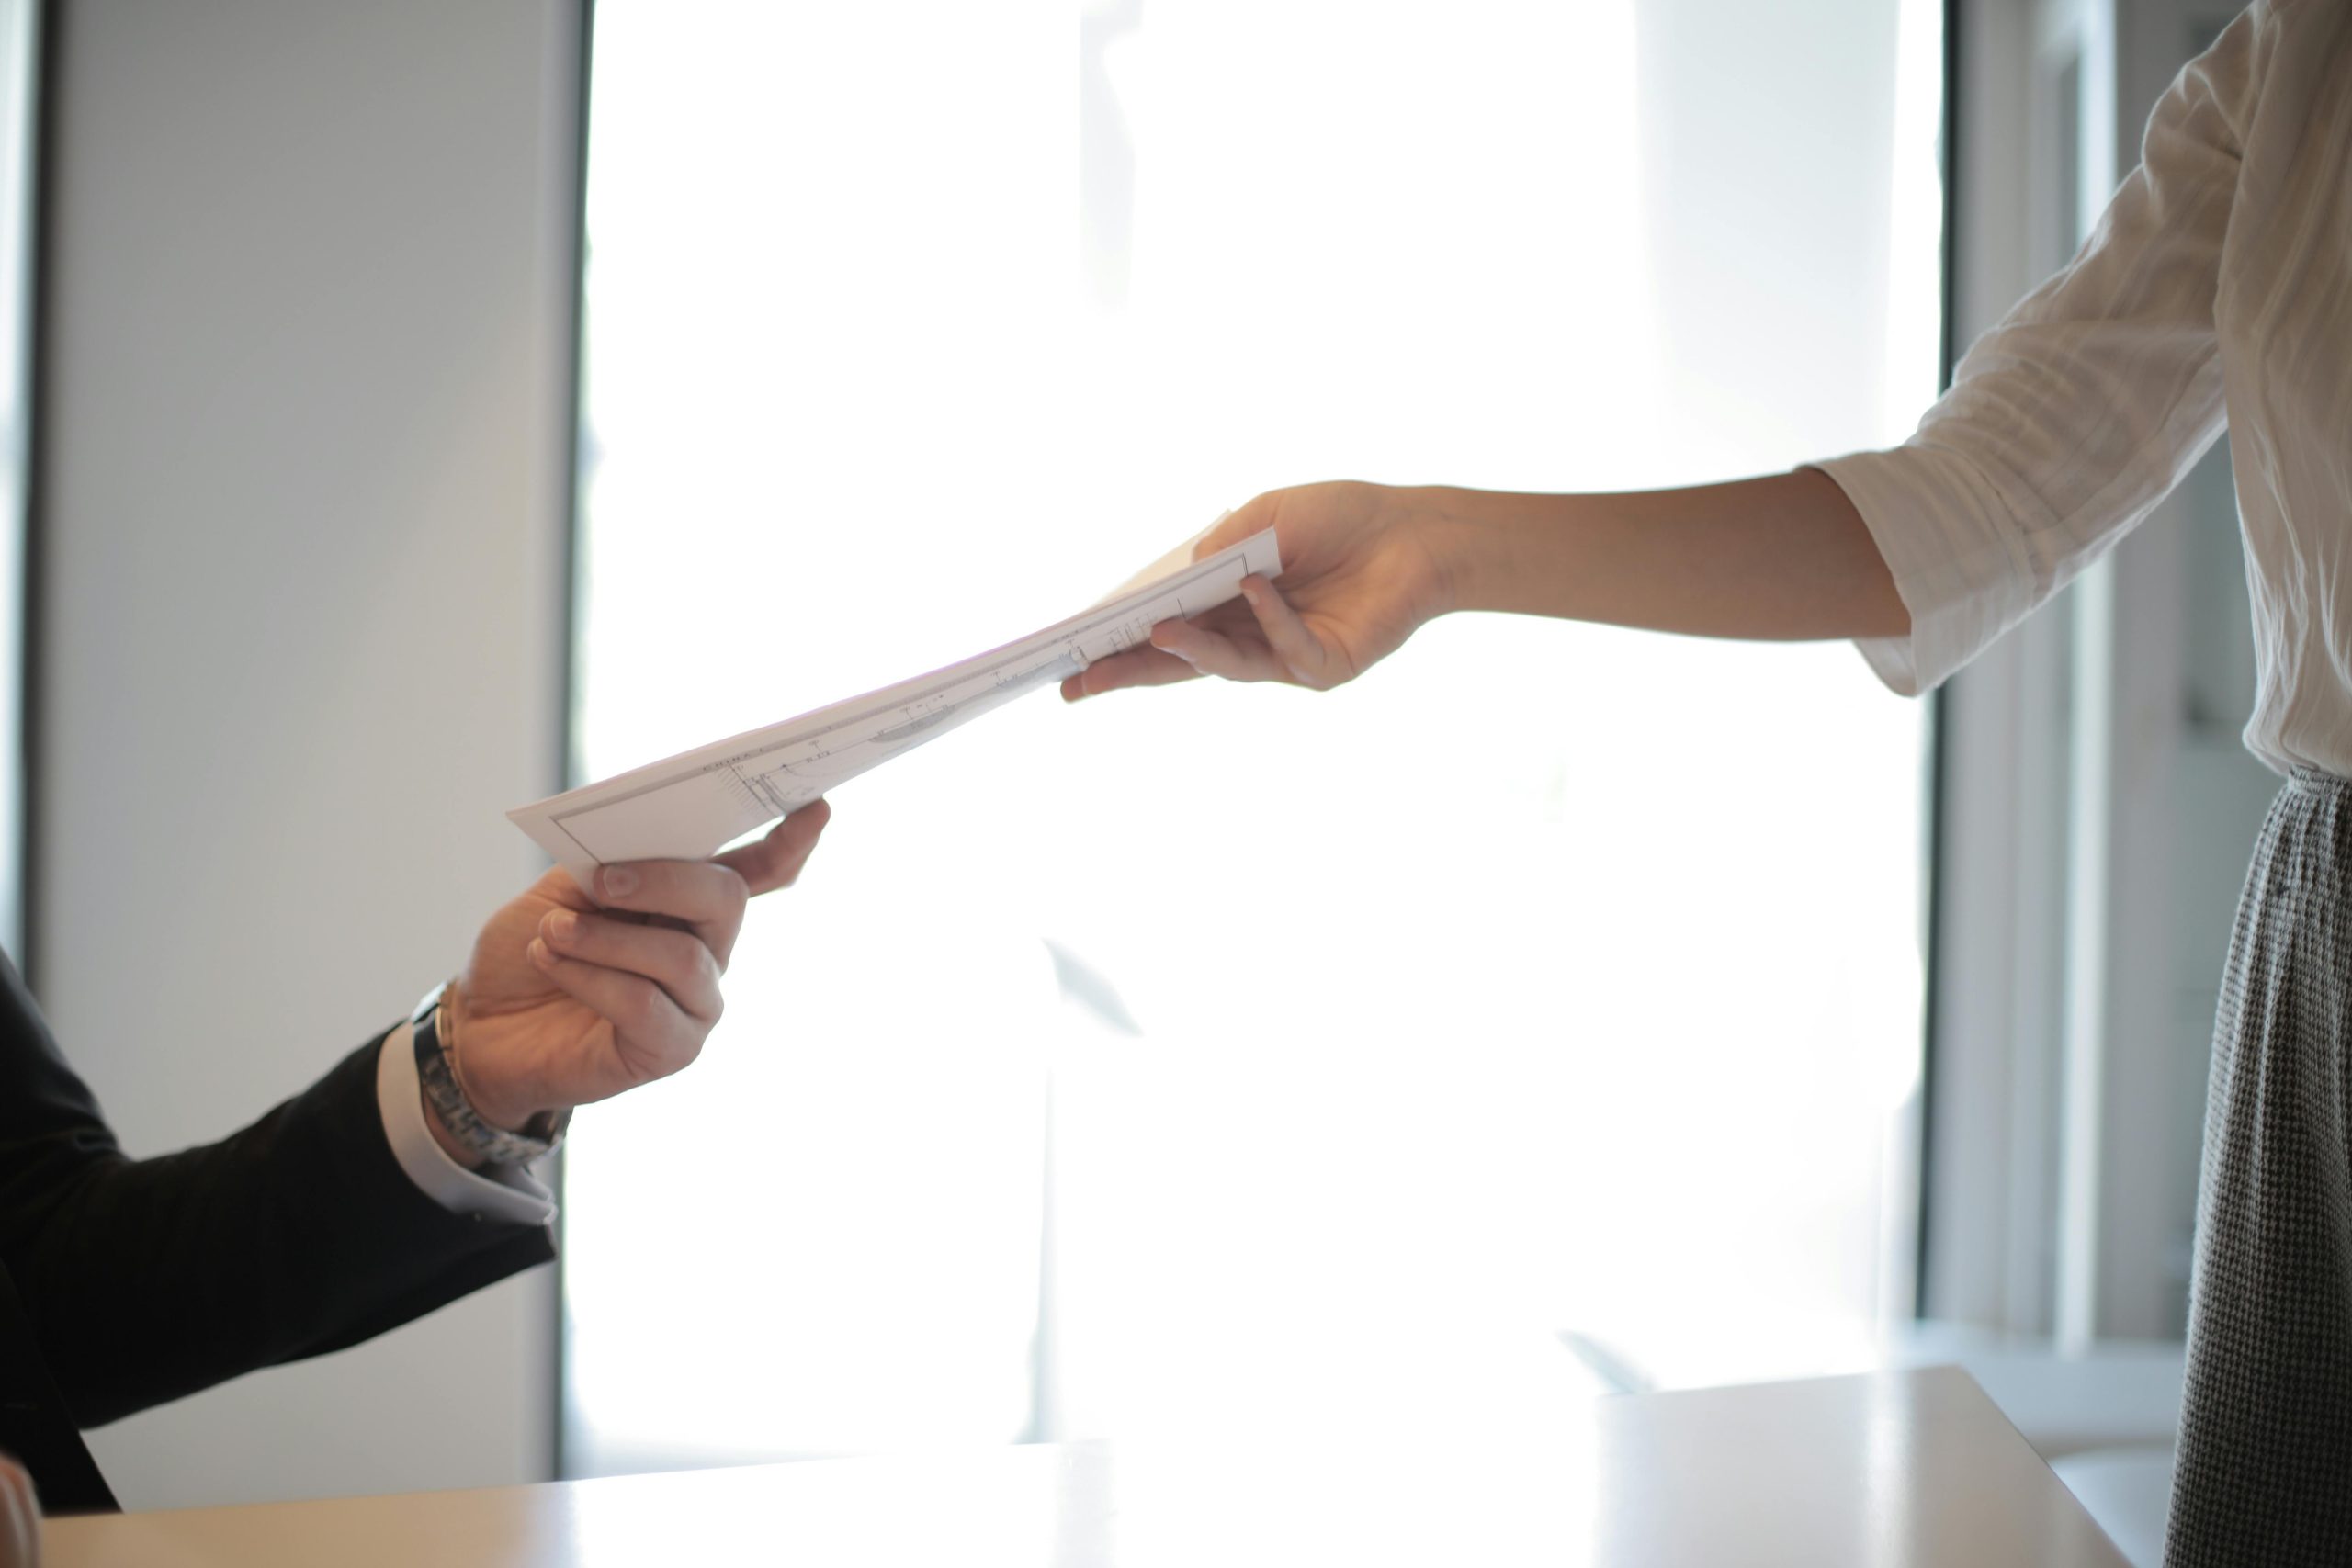 One person handing over an piece of paper to another person.